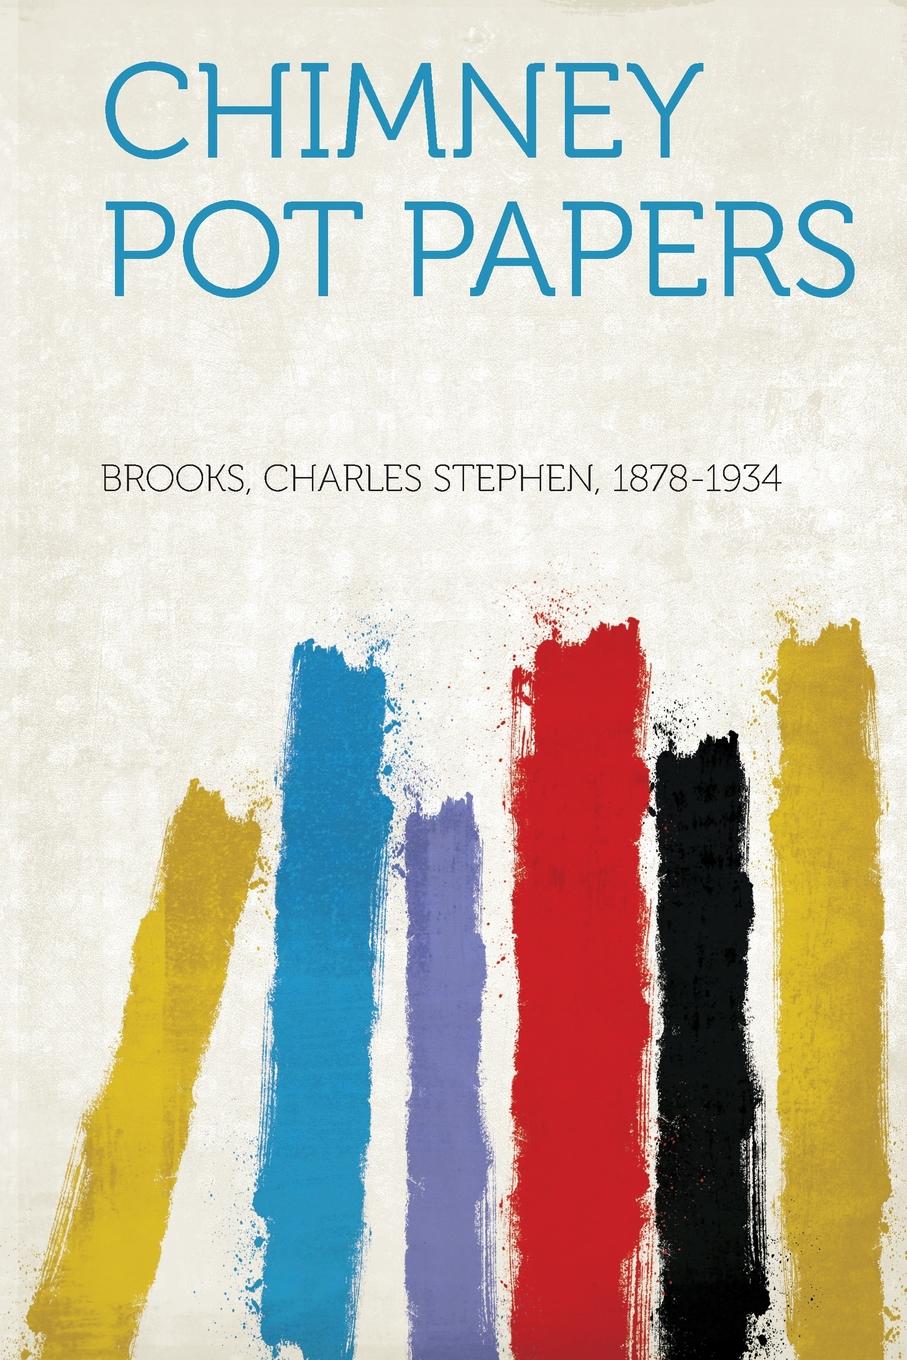 Chimney Pot Papers